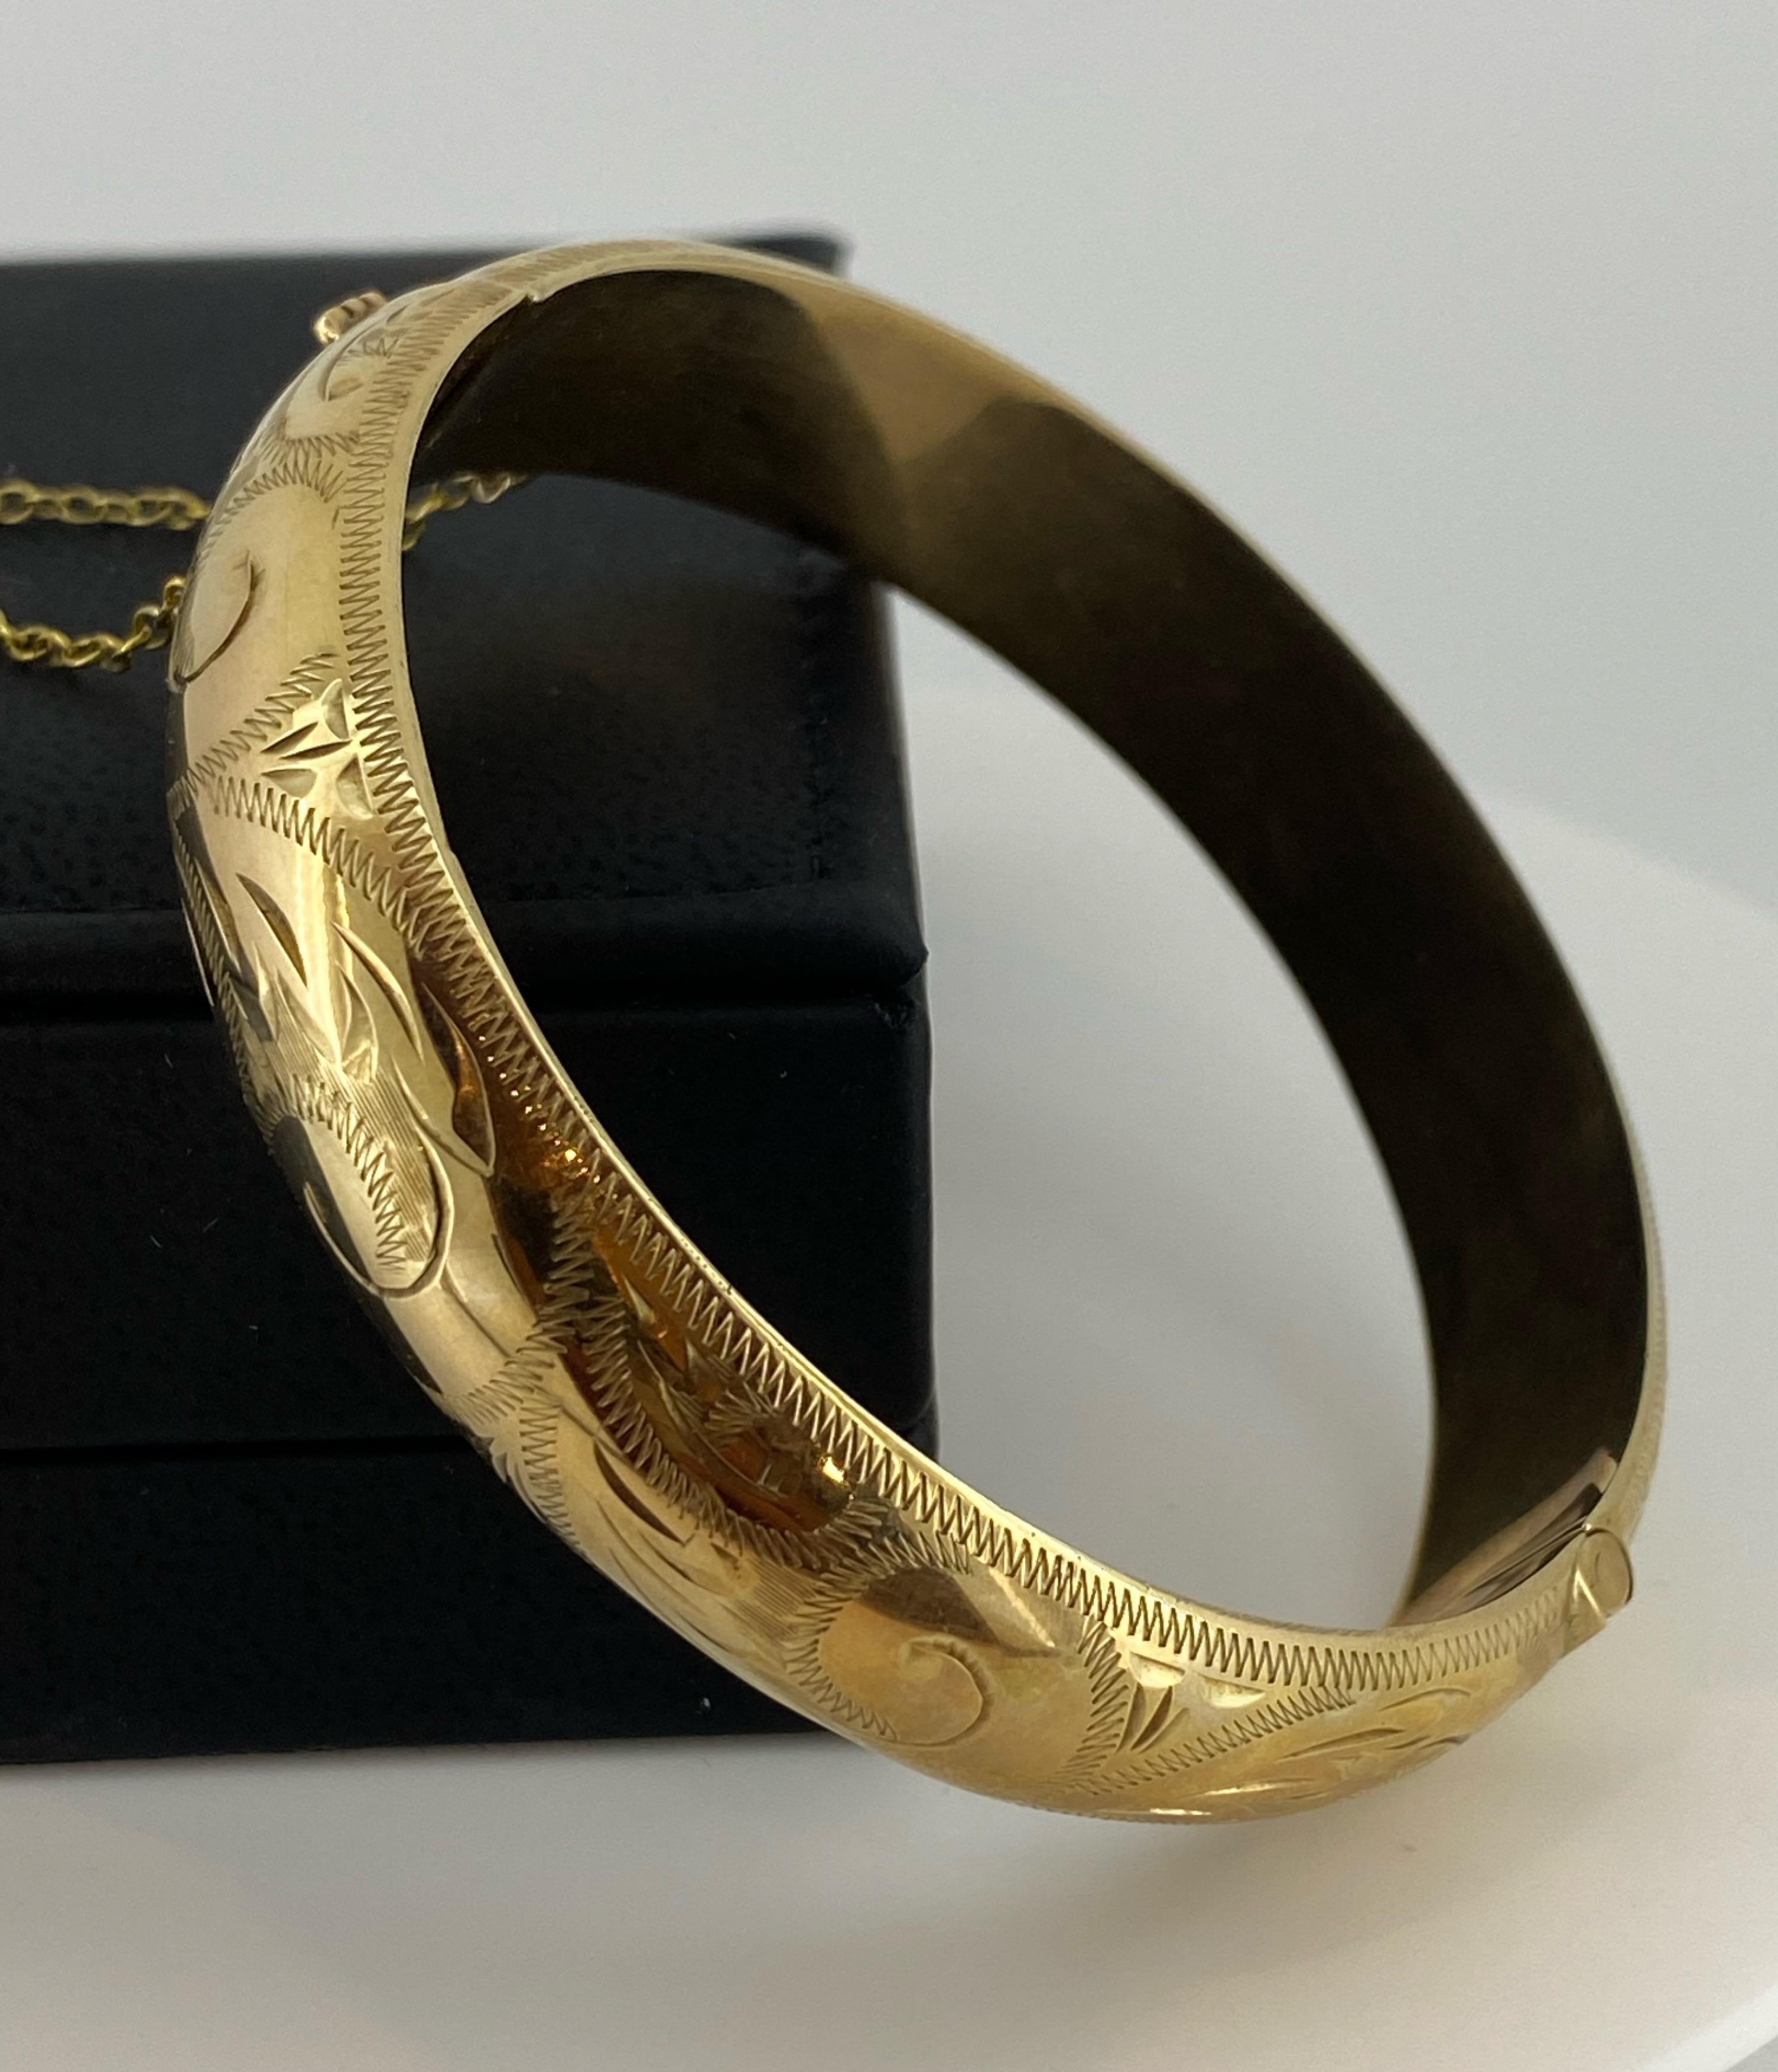 9K Yellow Gold Retro 1950's Finely Engraved Hinged Bangle. Circumference: 21cm. For Sale 3